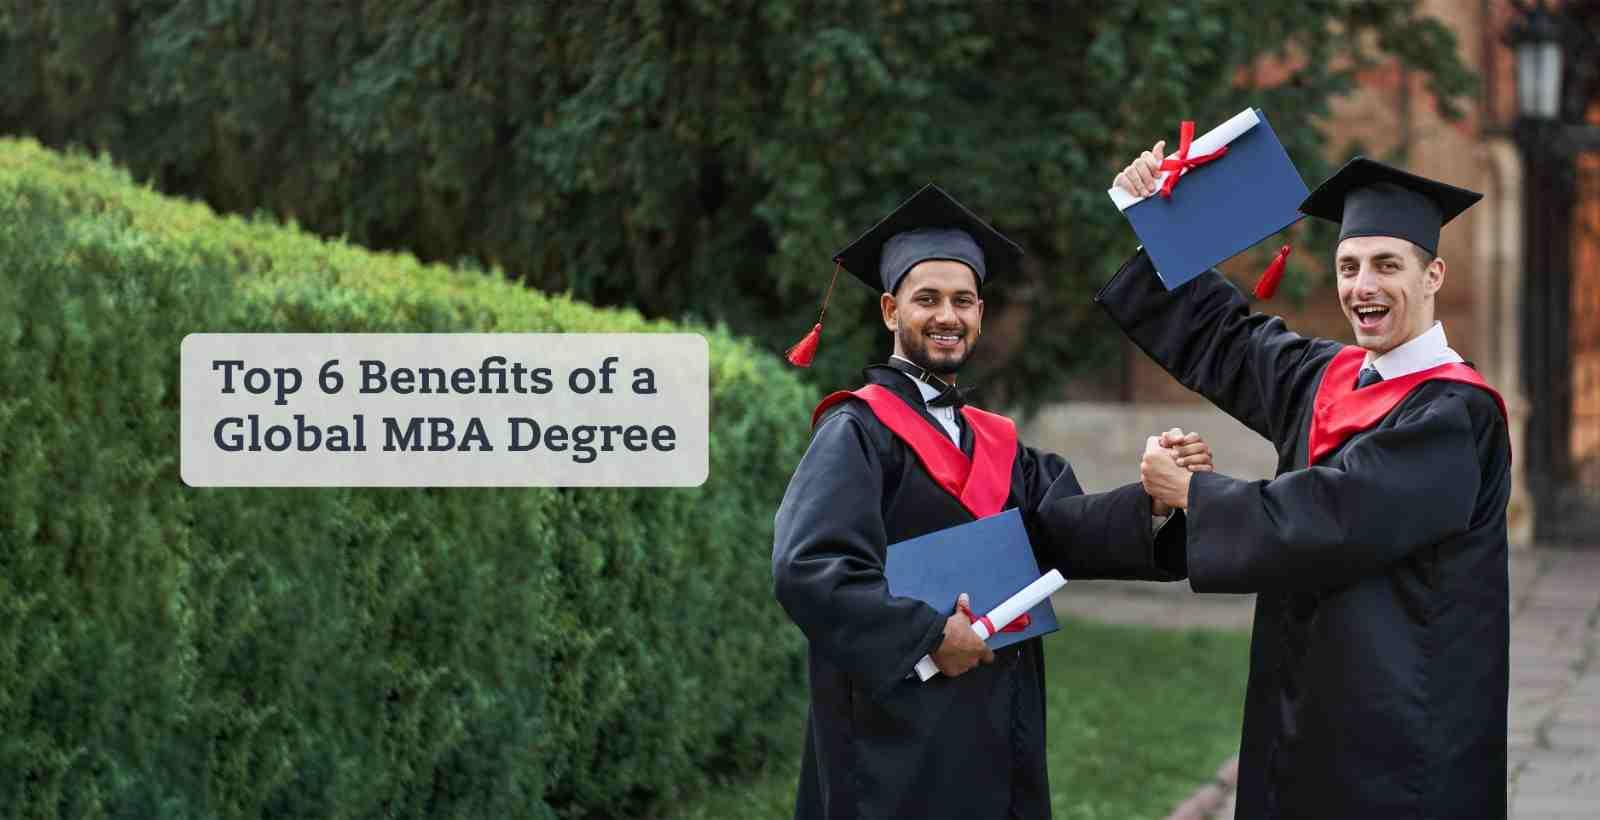 The Top 6 Benefits of a Global MBA Degree